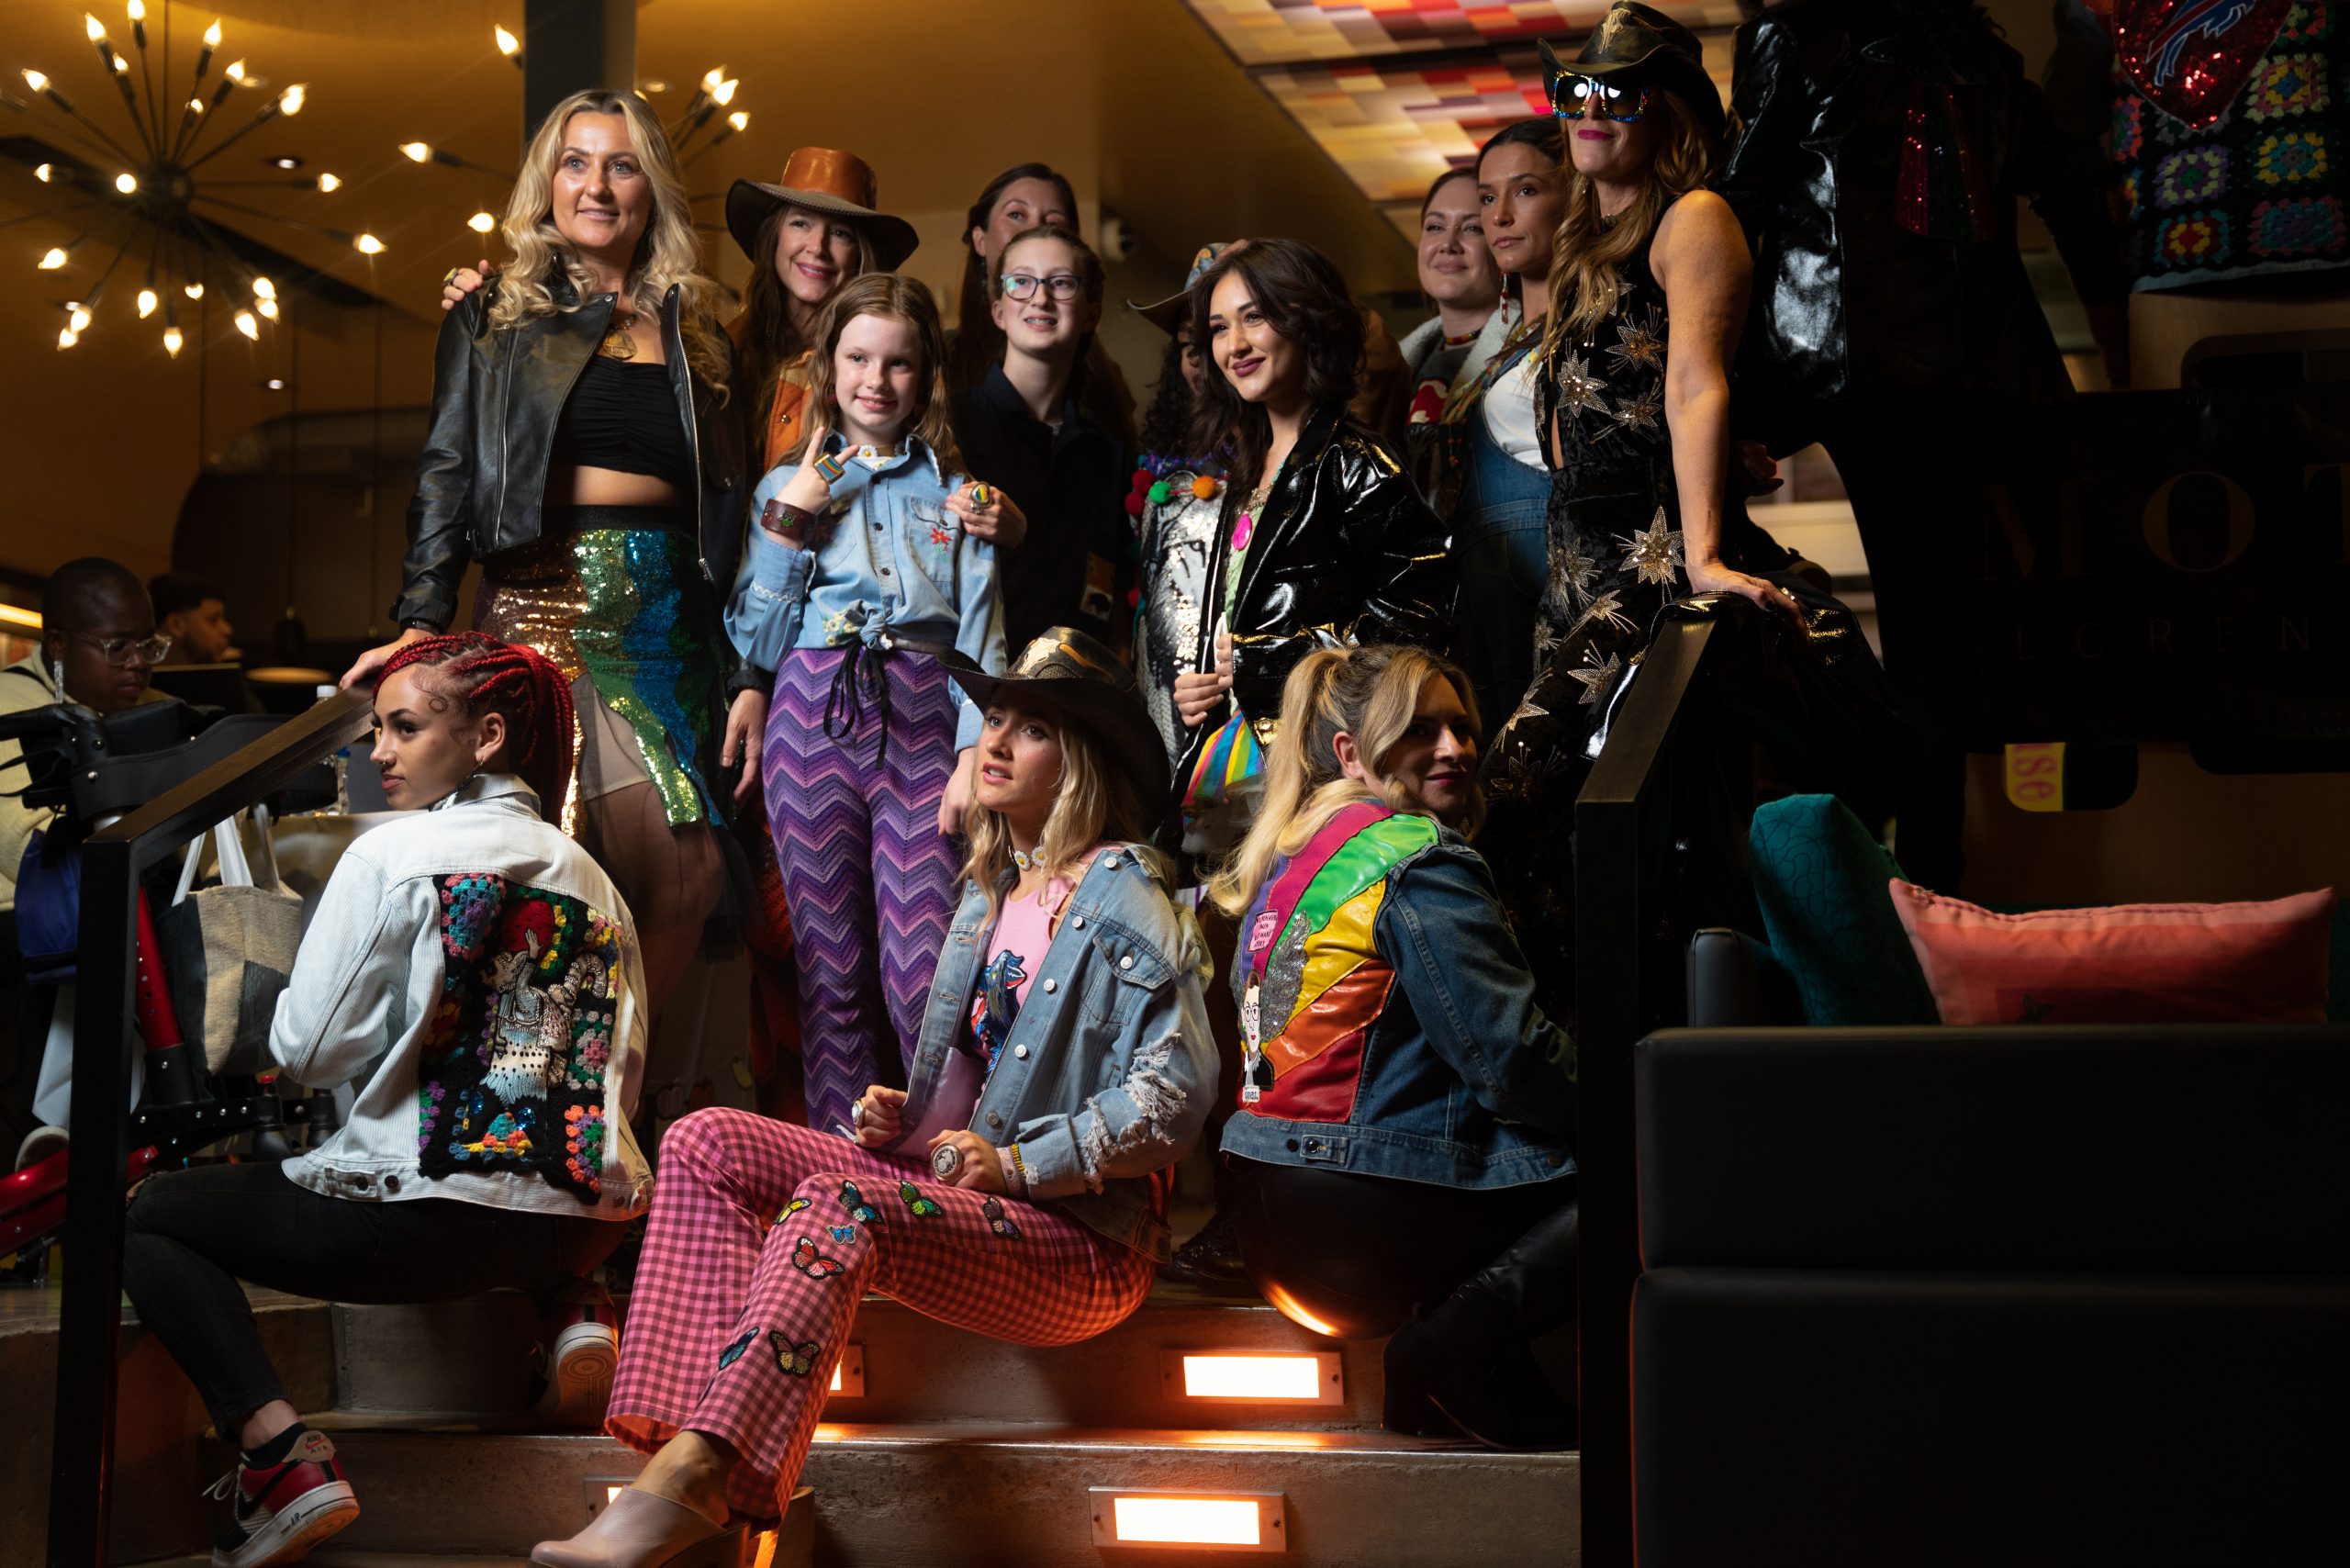 Group photo of models and designers in Aloft hotel lobby, taken after Syracuse Fashion Week's Wednesday 